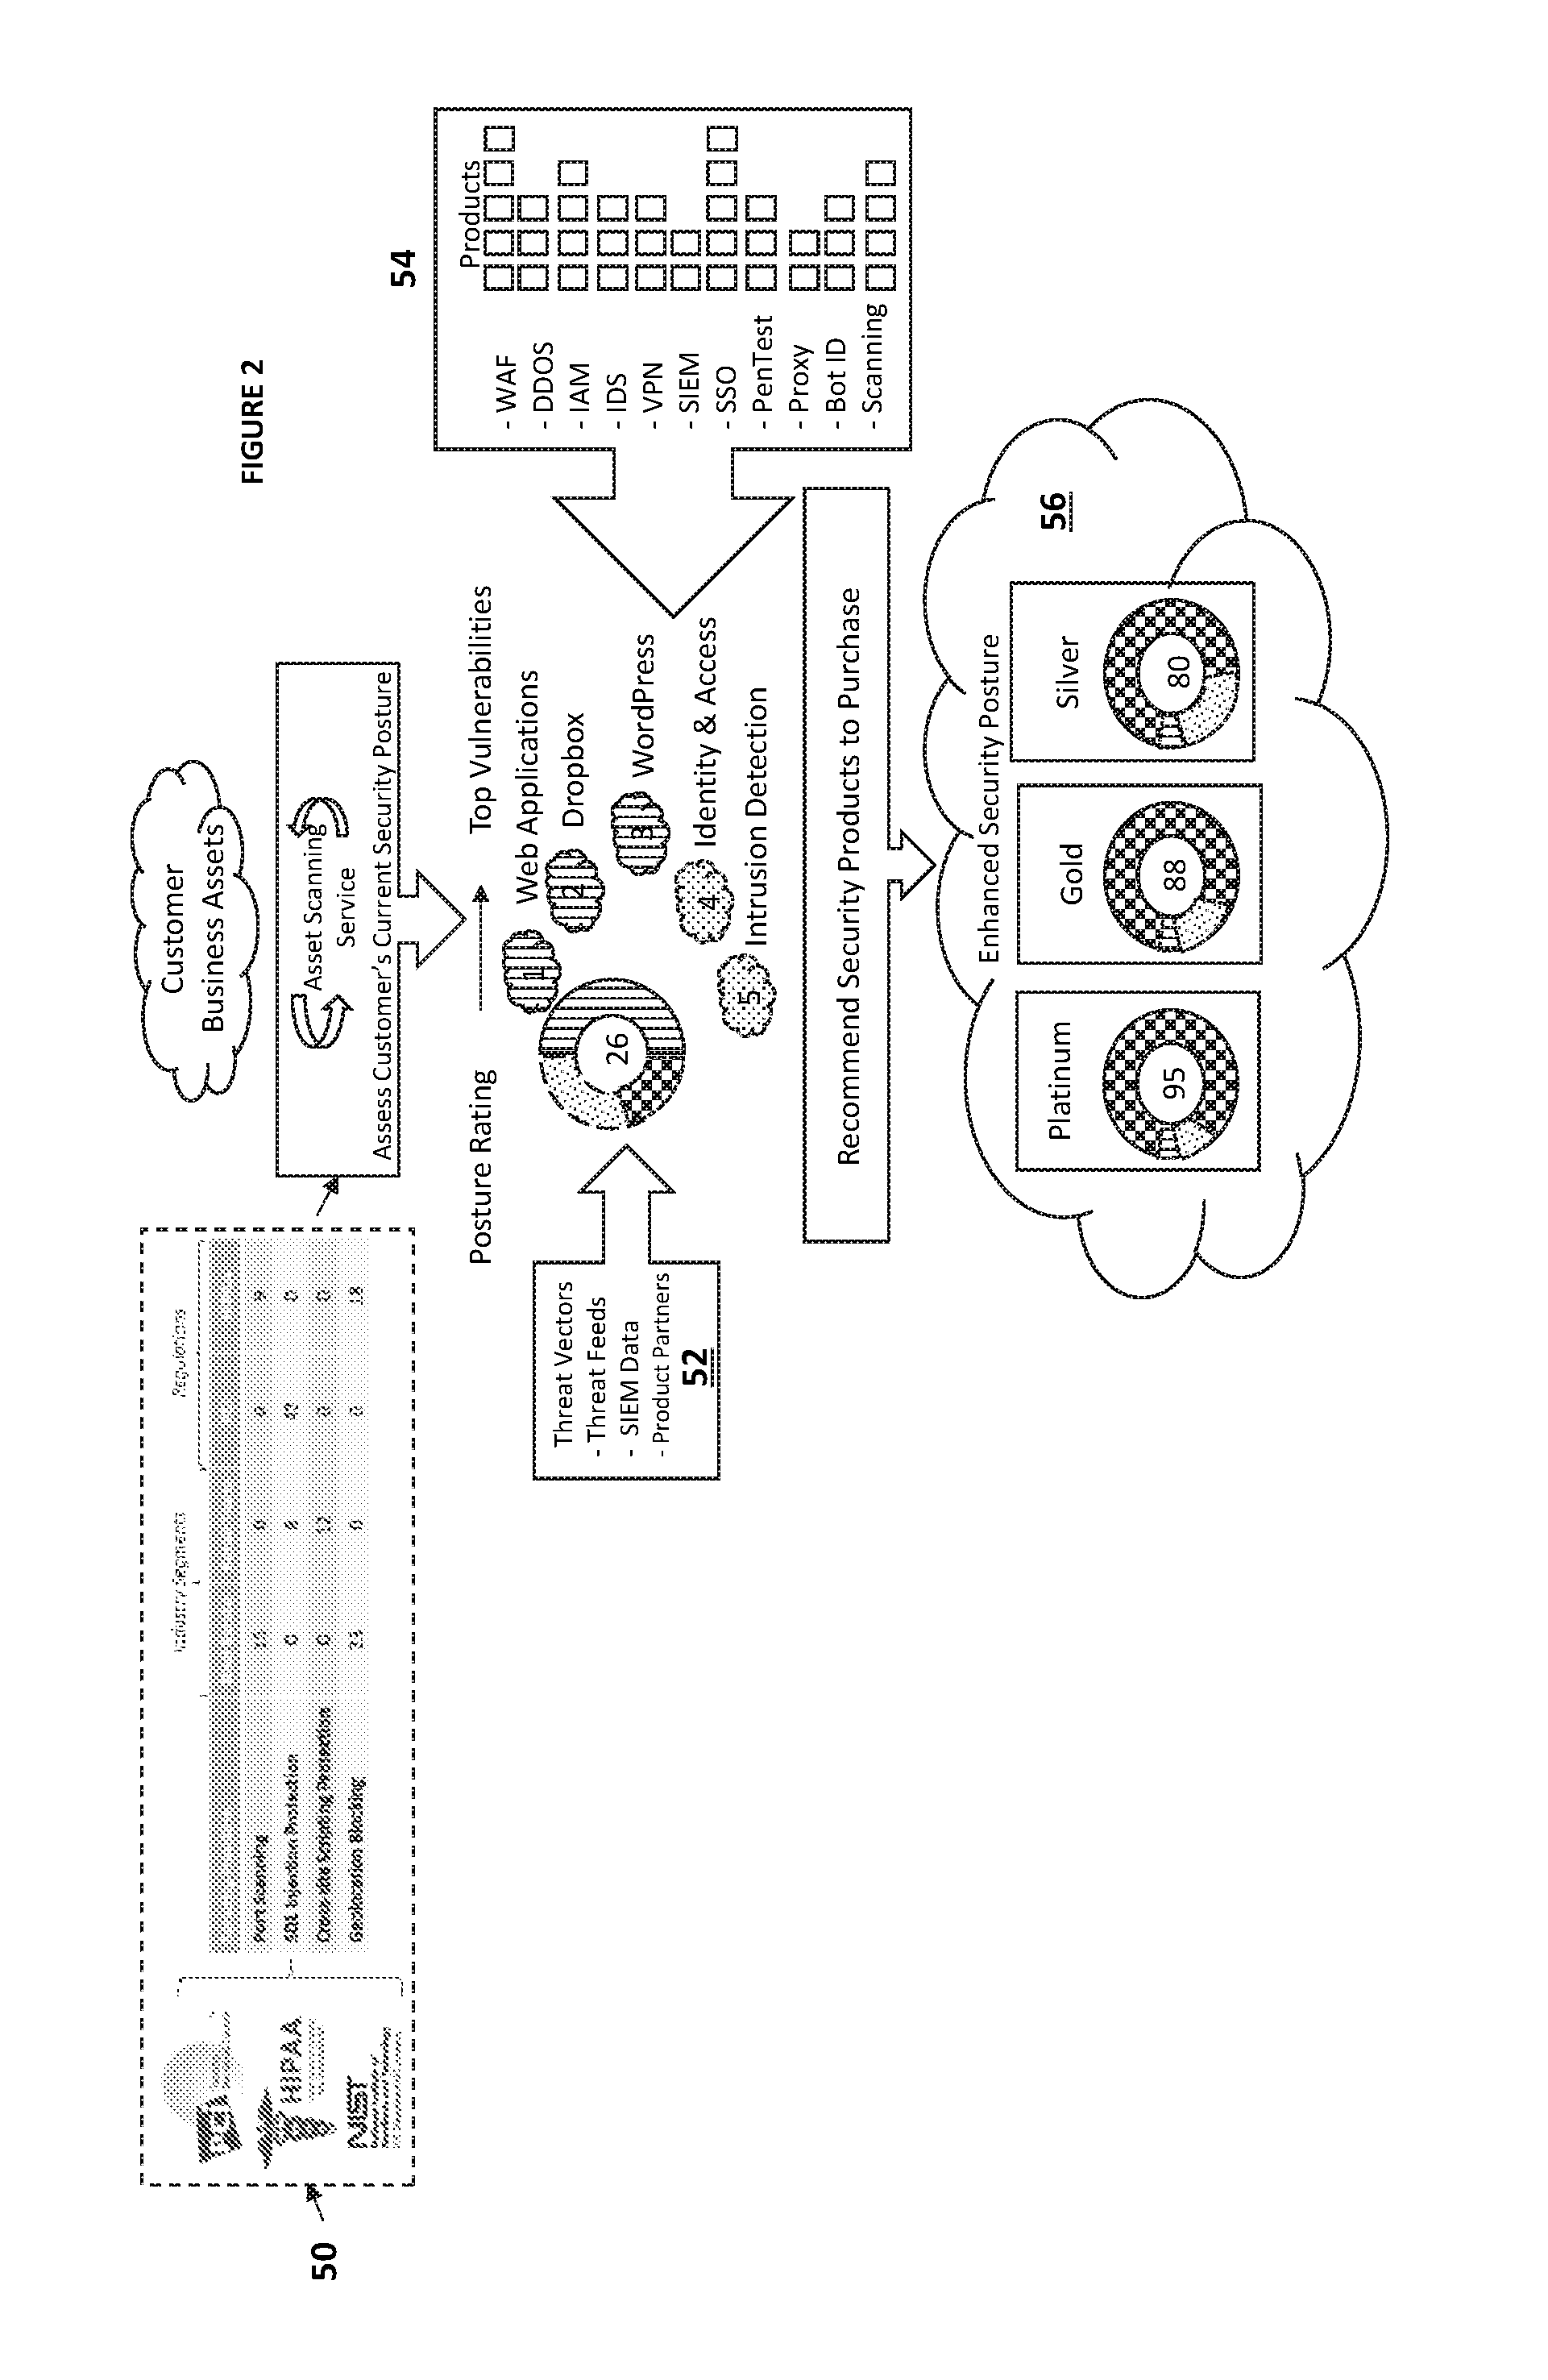 System and Method For Providing Technology-Driven End-to-End Managed Security Service Products Through a Security Marketplace